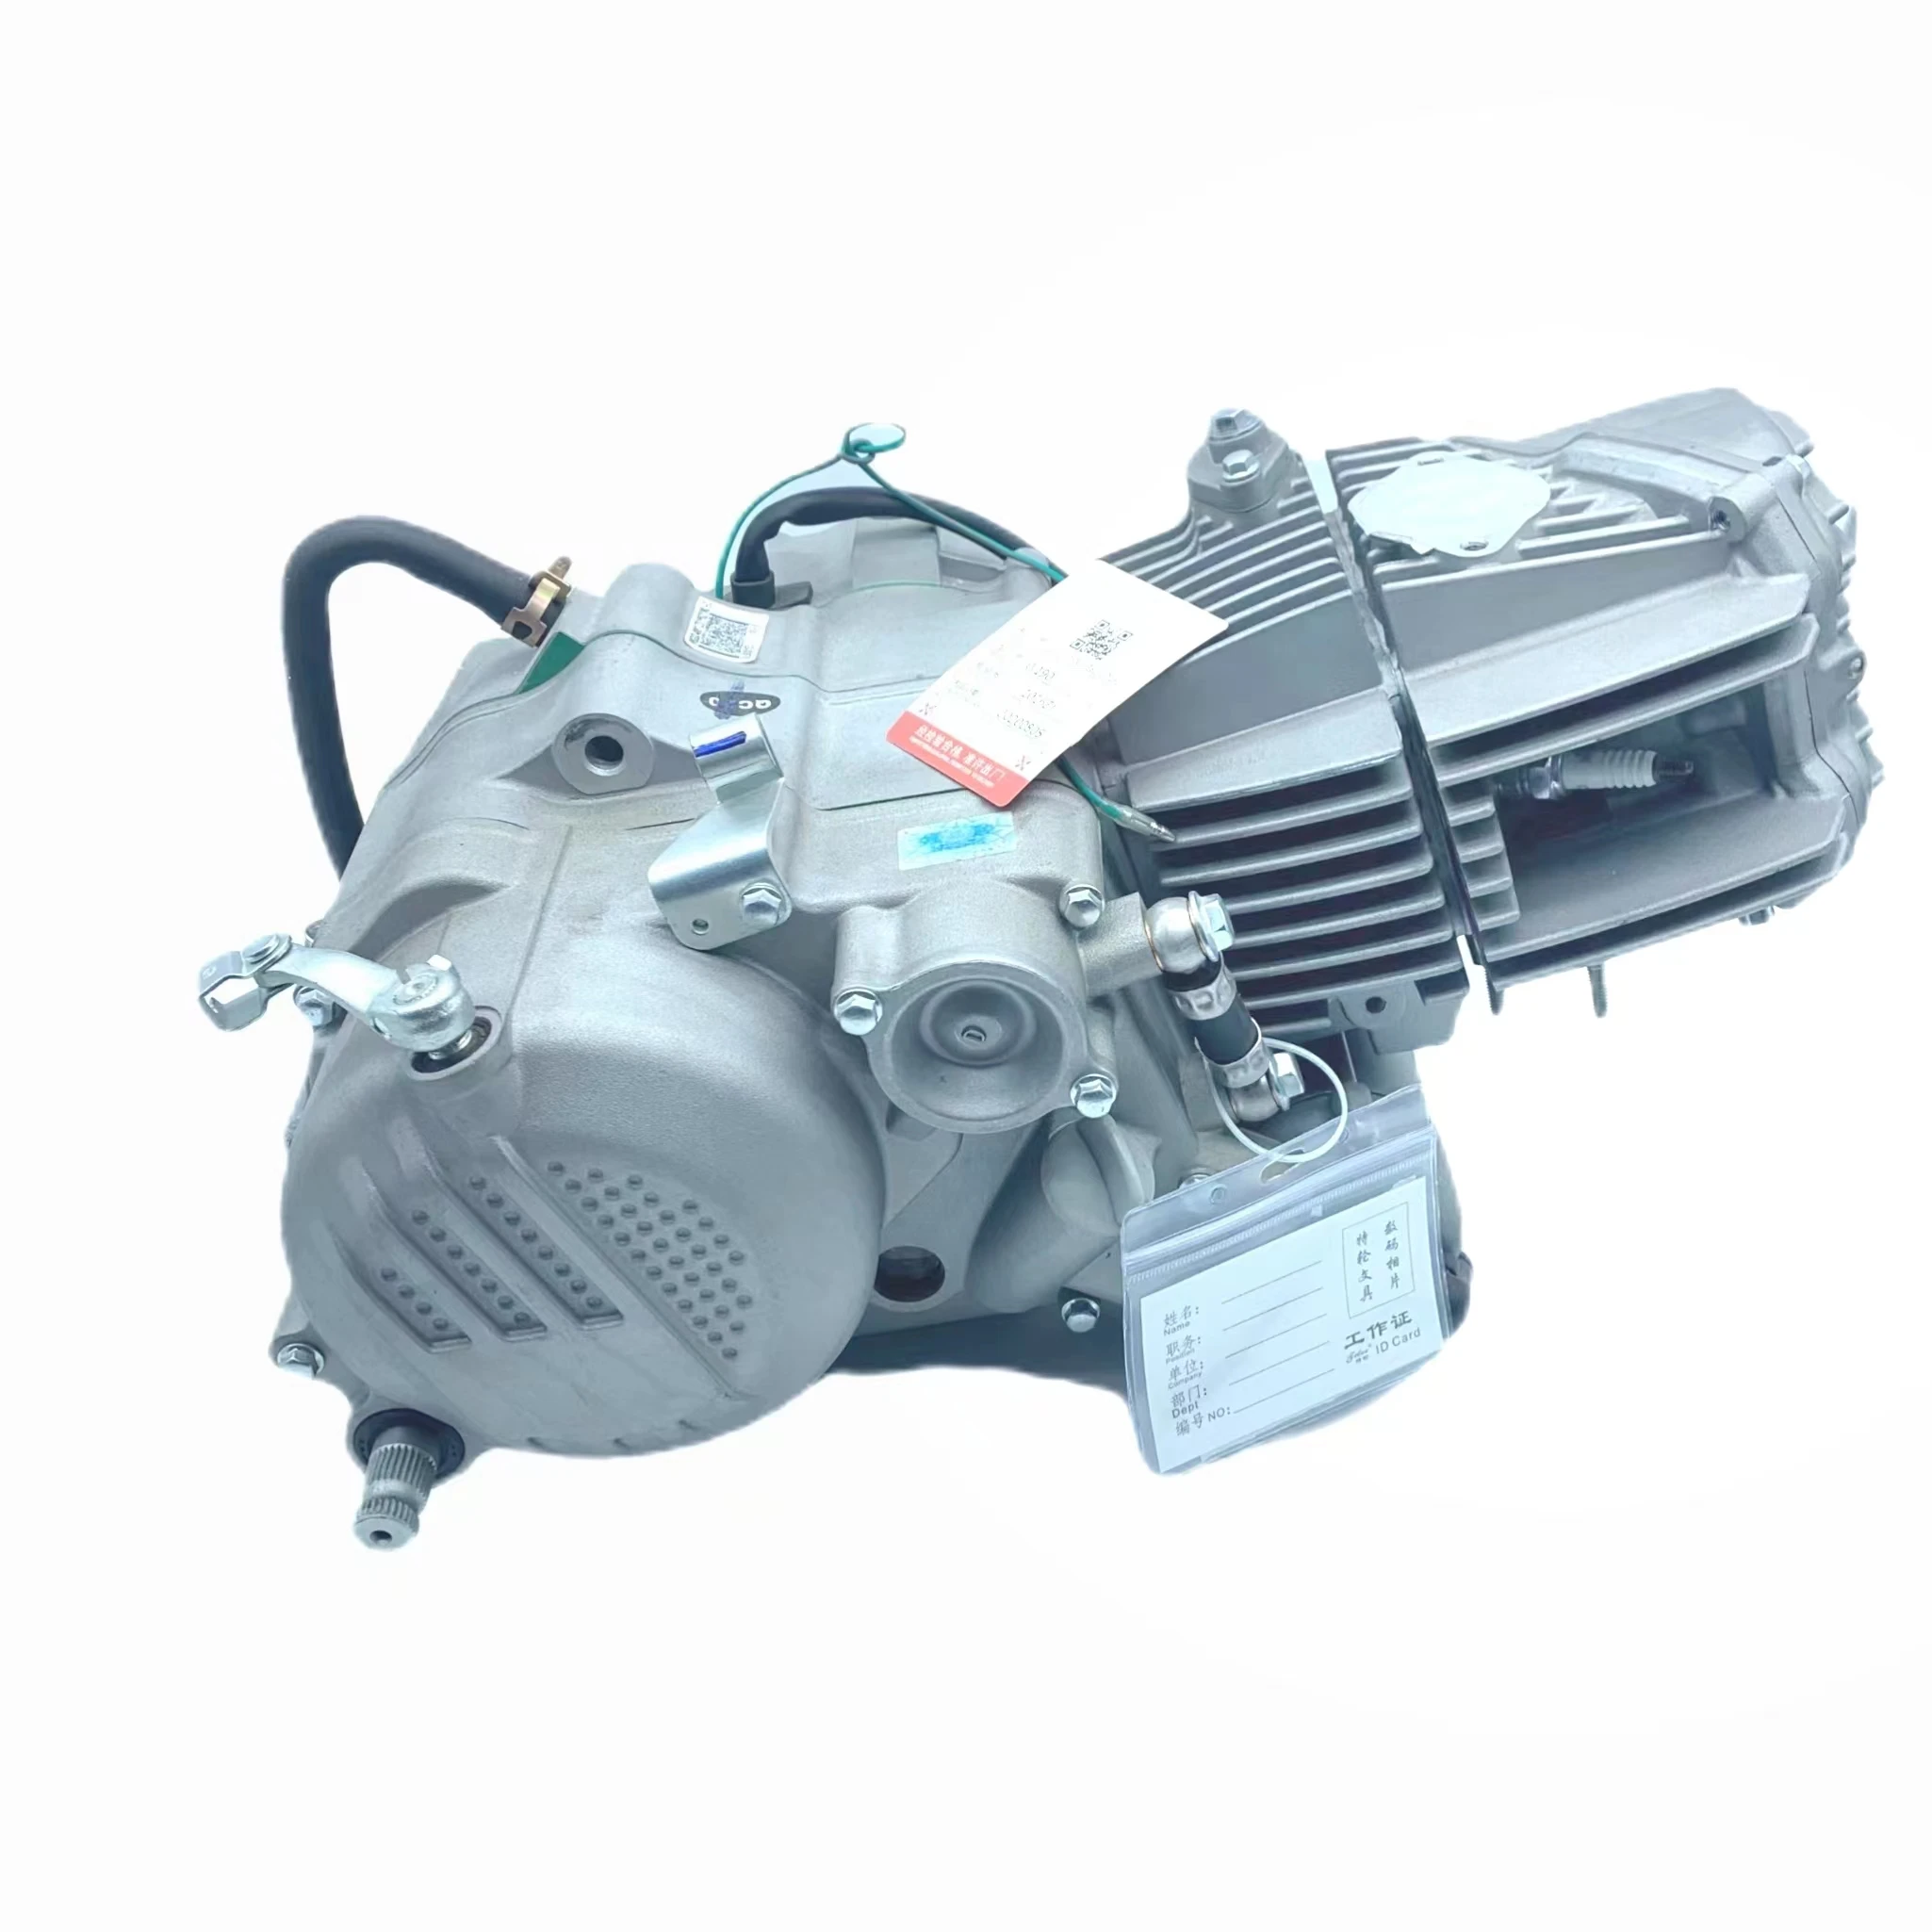 OEM Zongshen W190cc engine 4 stroke motorcycle engine assembly 190cc engine electric start suitable for off-road racing vehicles